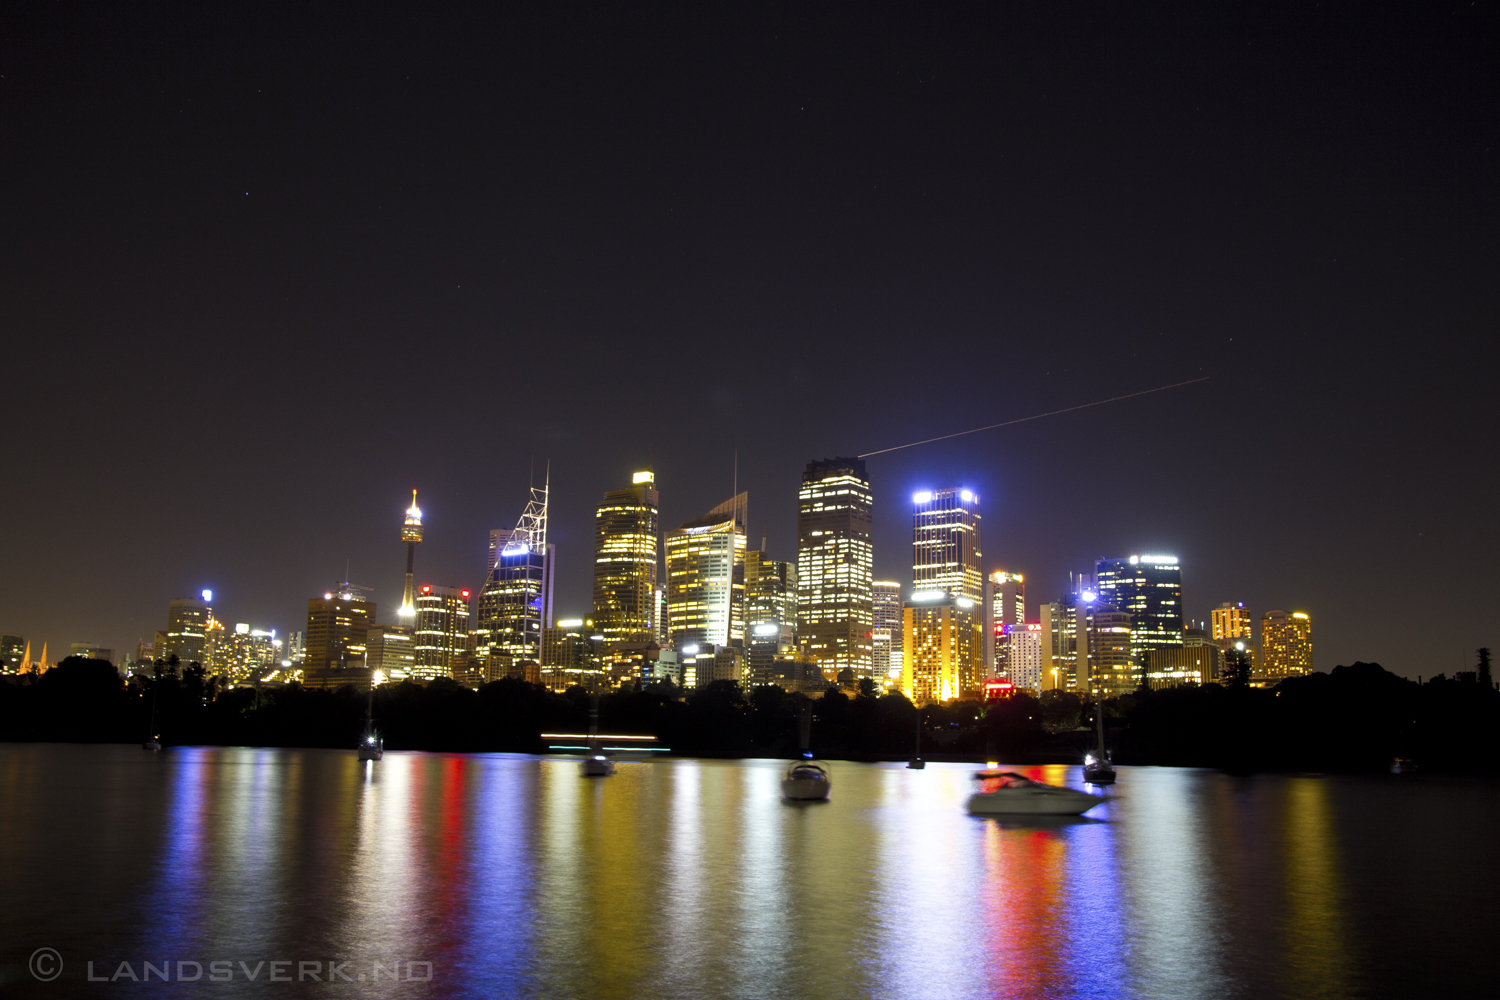 Sydney at night, New South Wales. 

(Canon EOS 550D / Sigma 18-50mm F2.8)